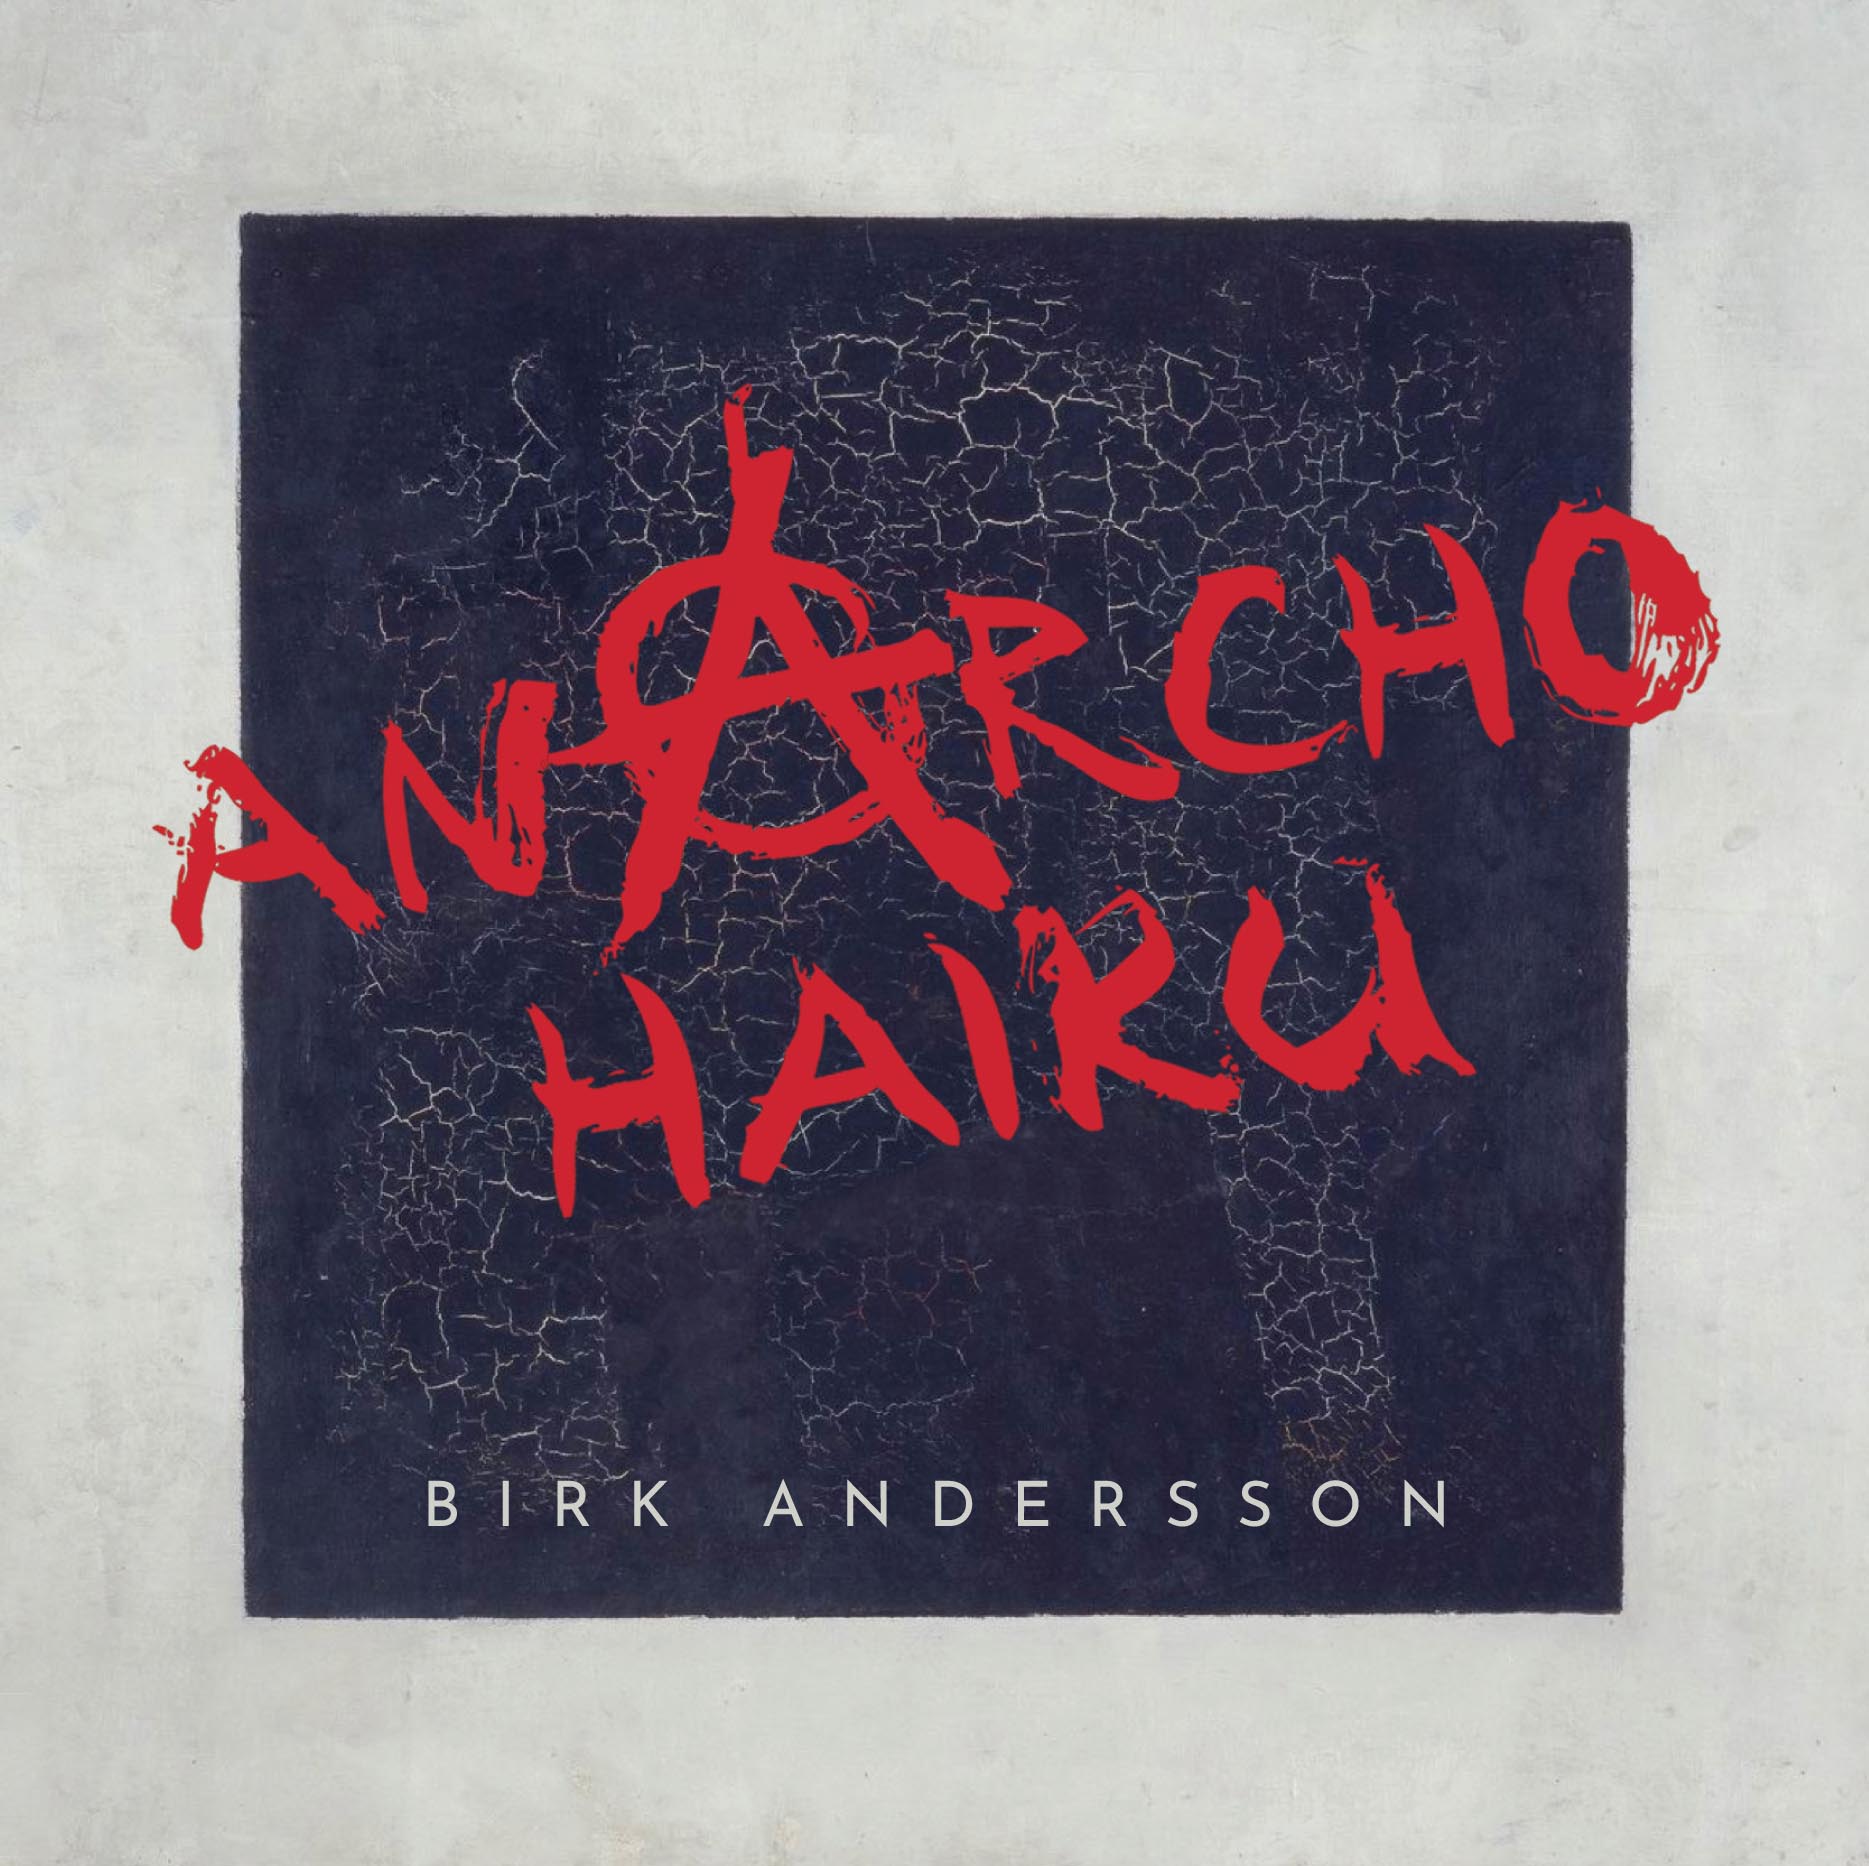 Cover to 'Anarcho Haiku' by Birk Anderssson